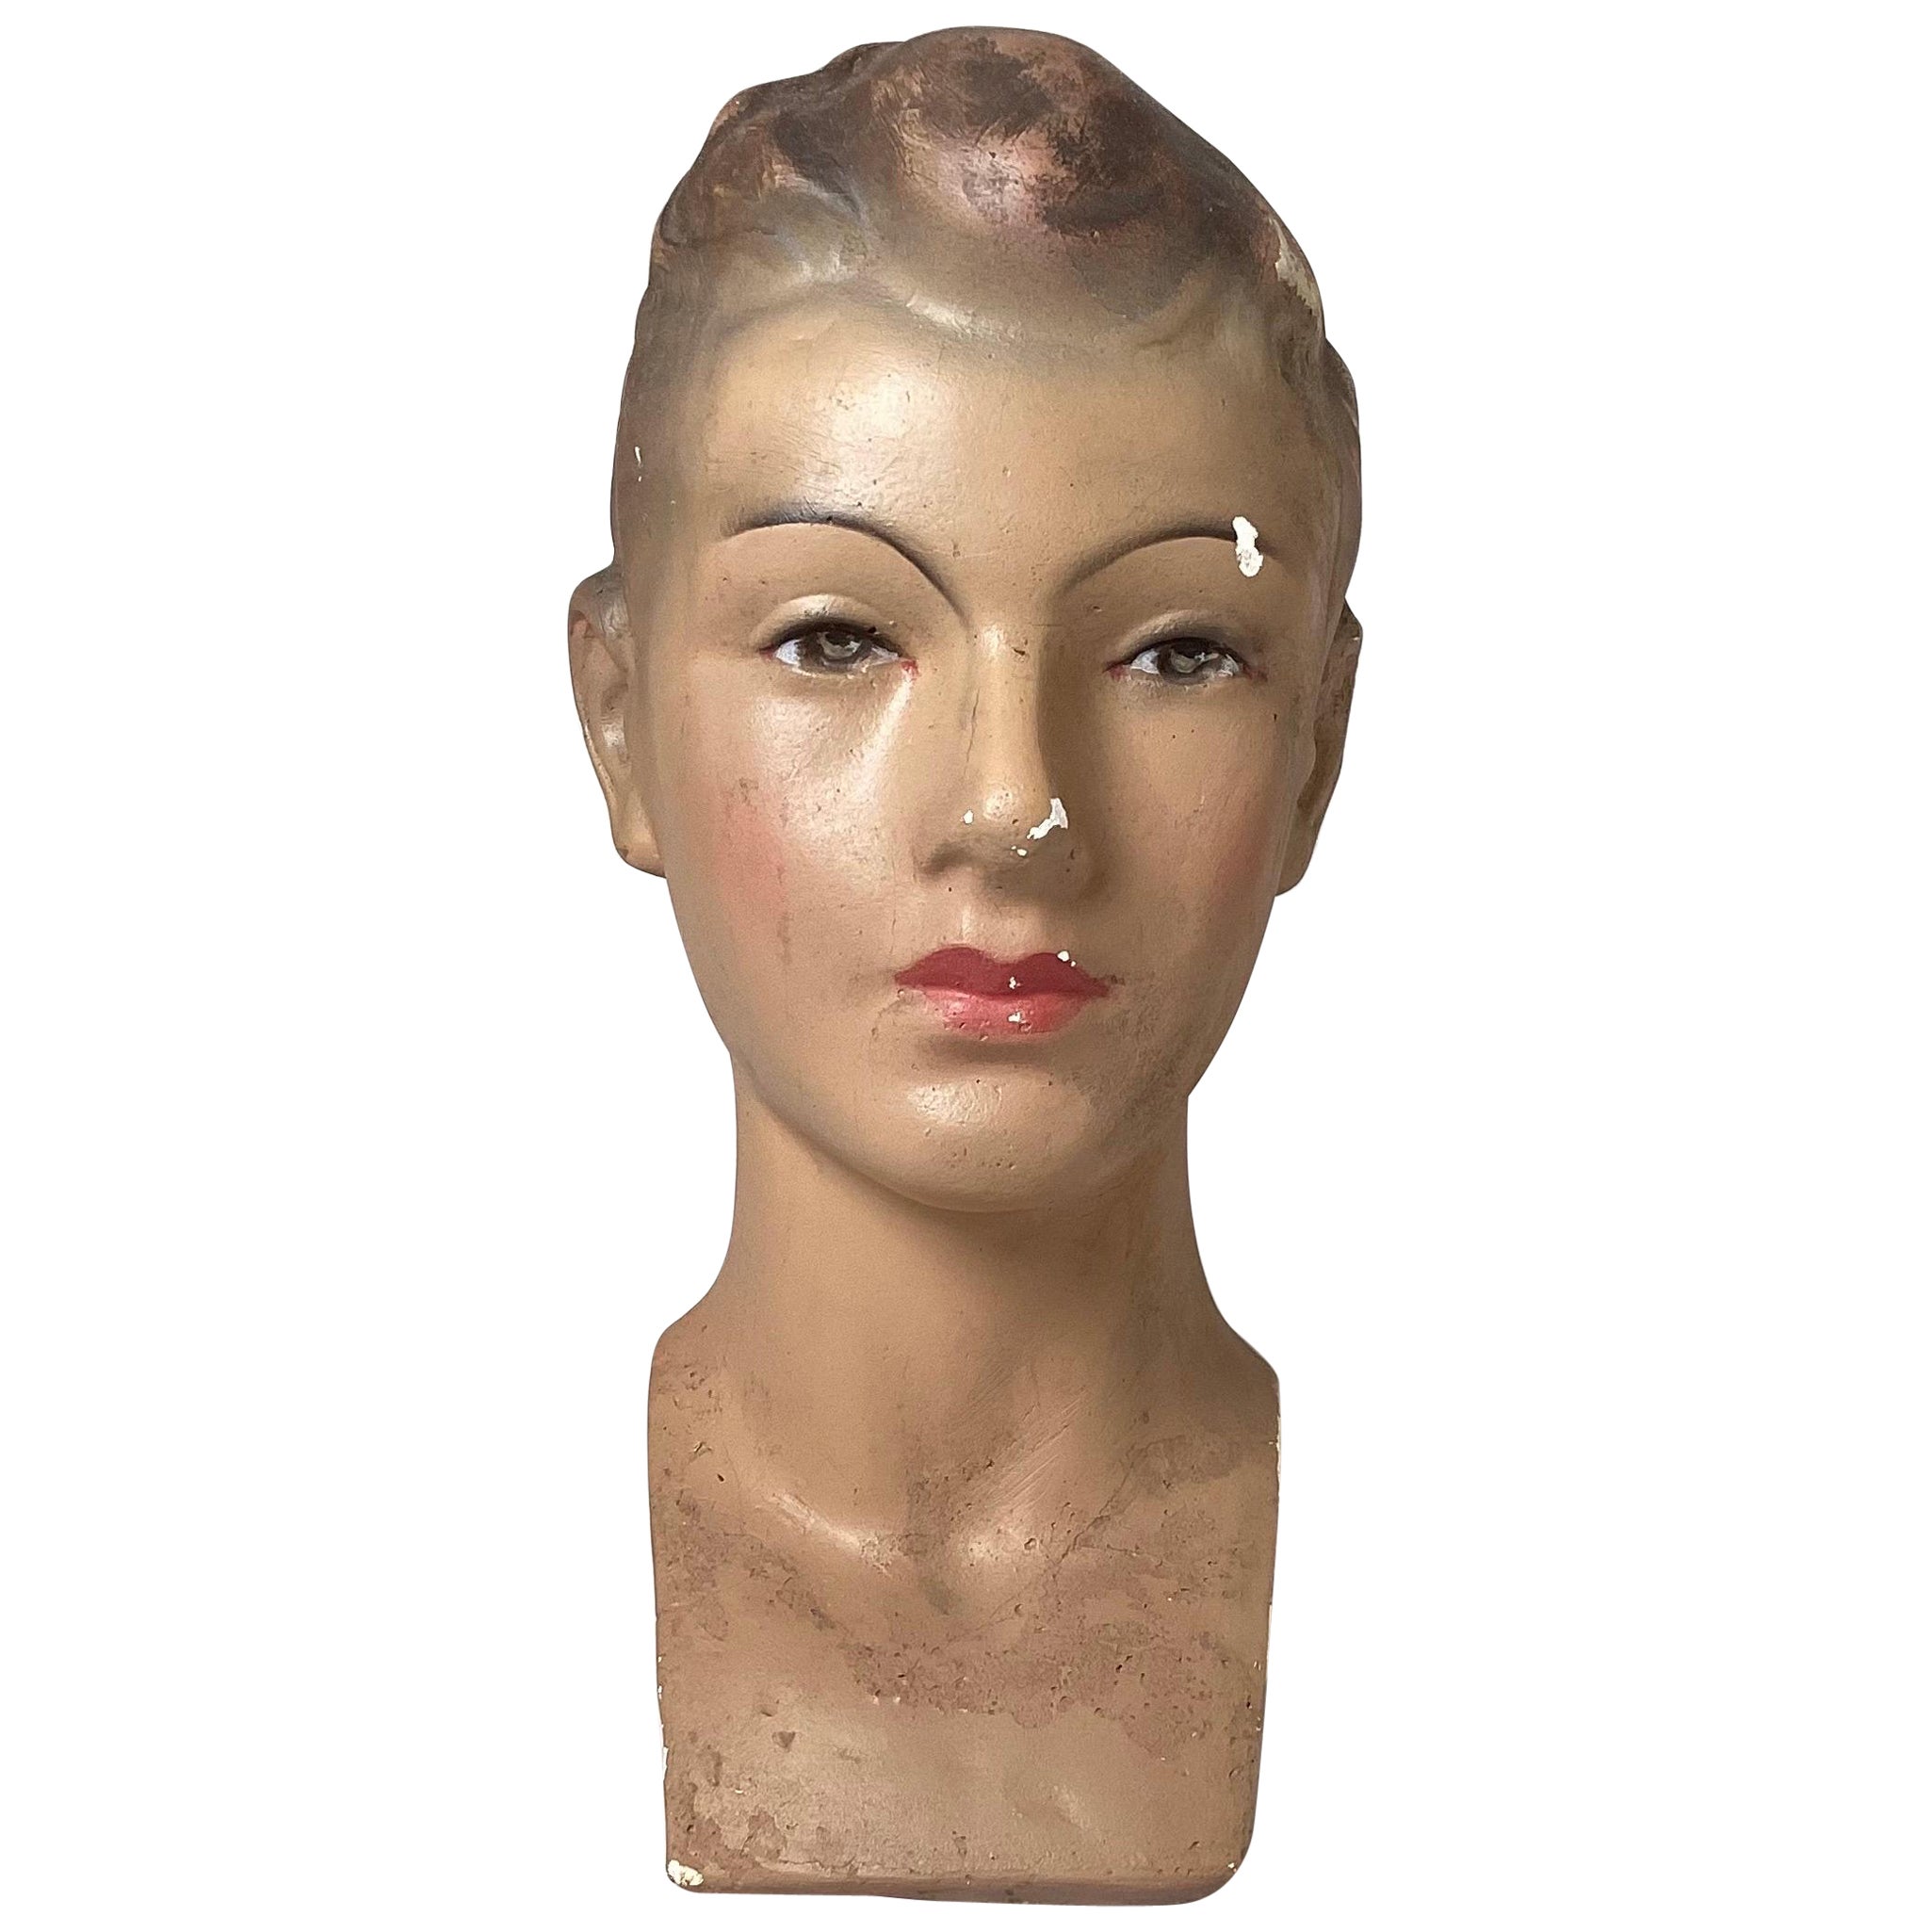 European Young Male Mannequin Head, 1940s